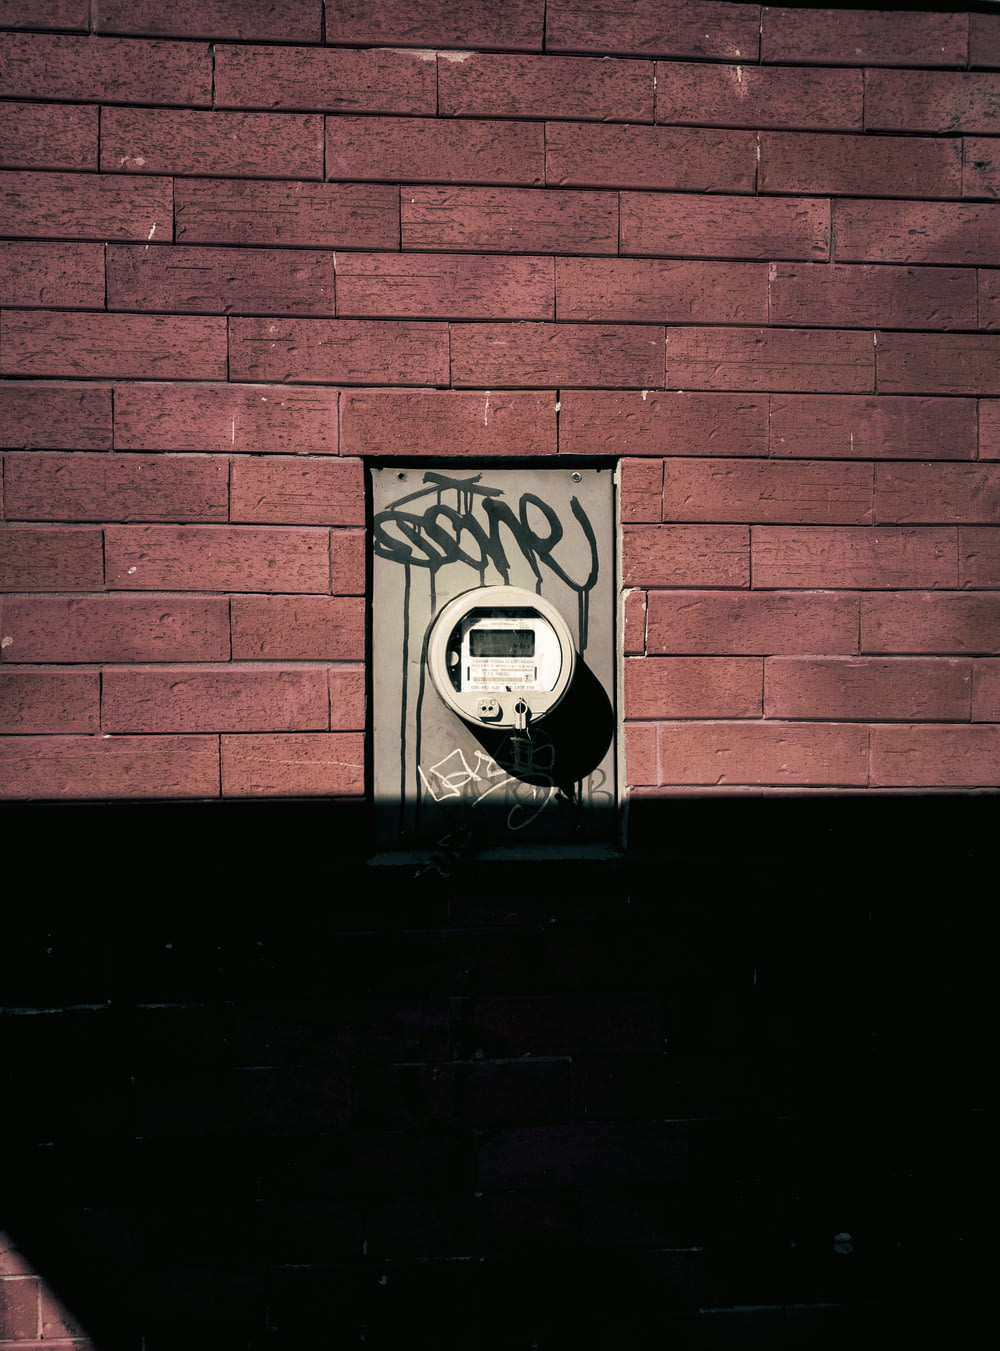 a brick wall with graffiti on it and a parking meter